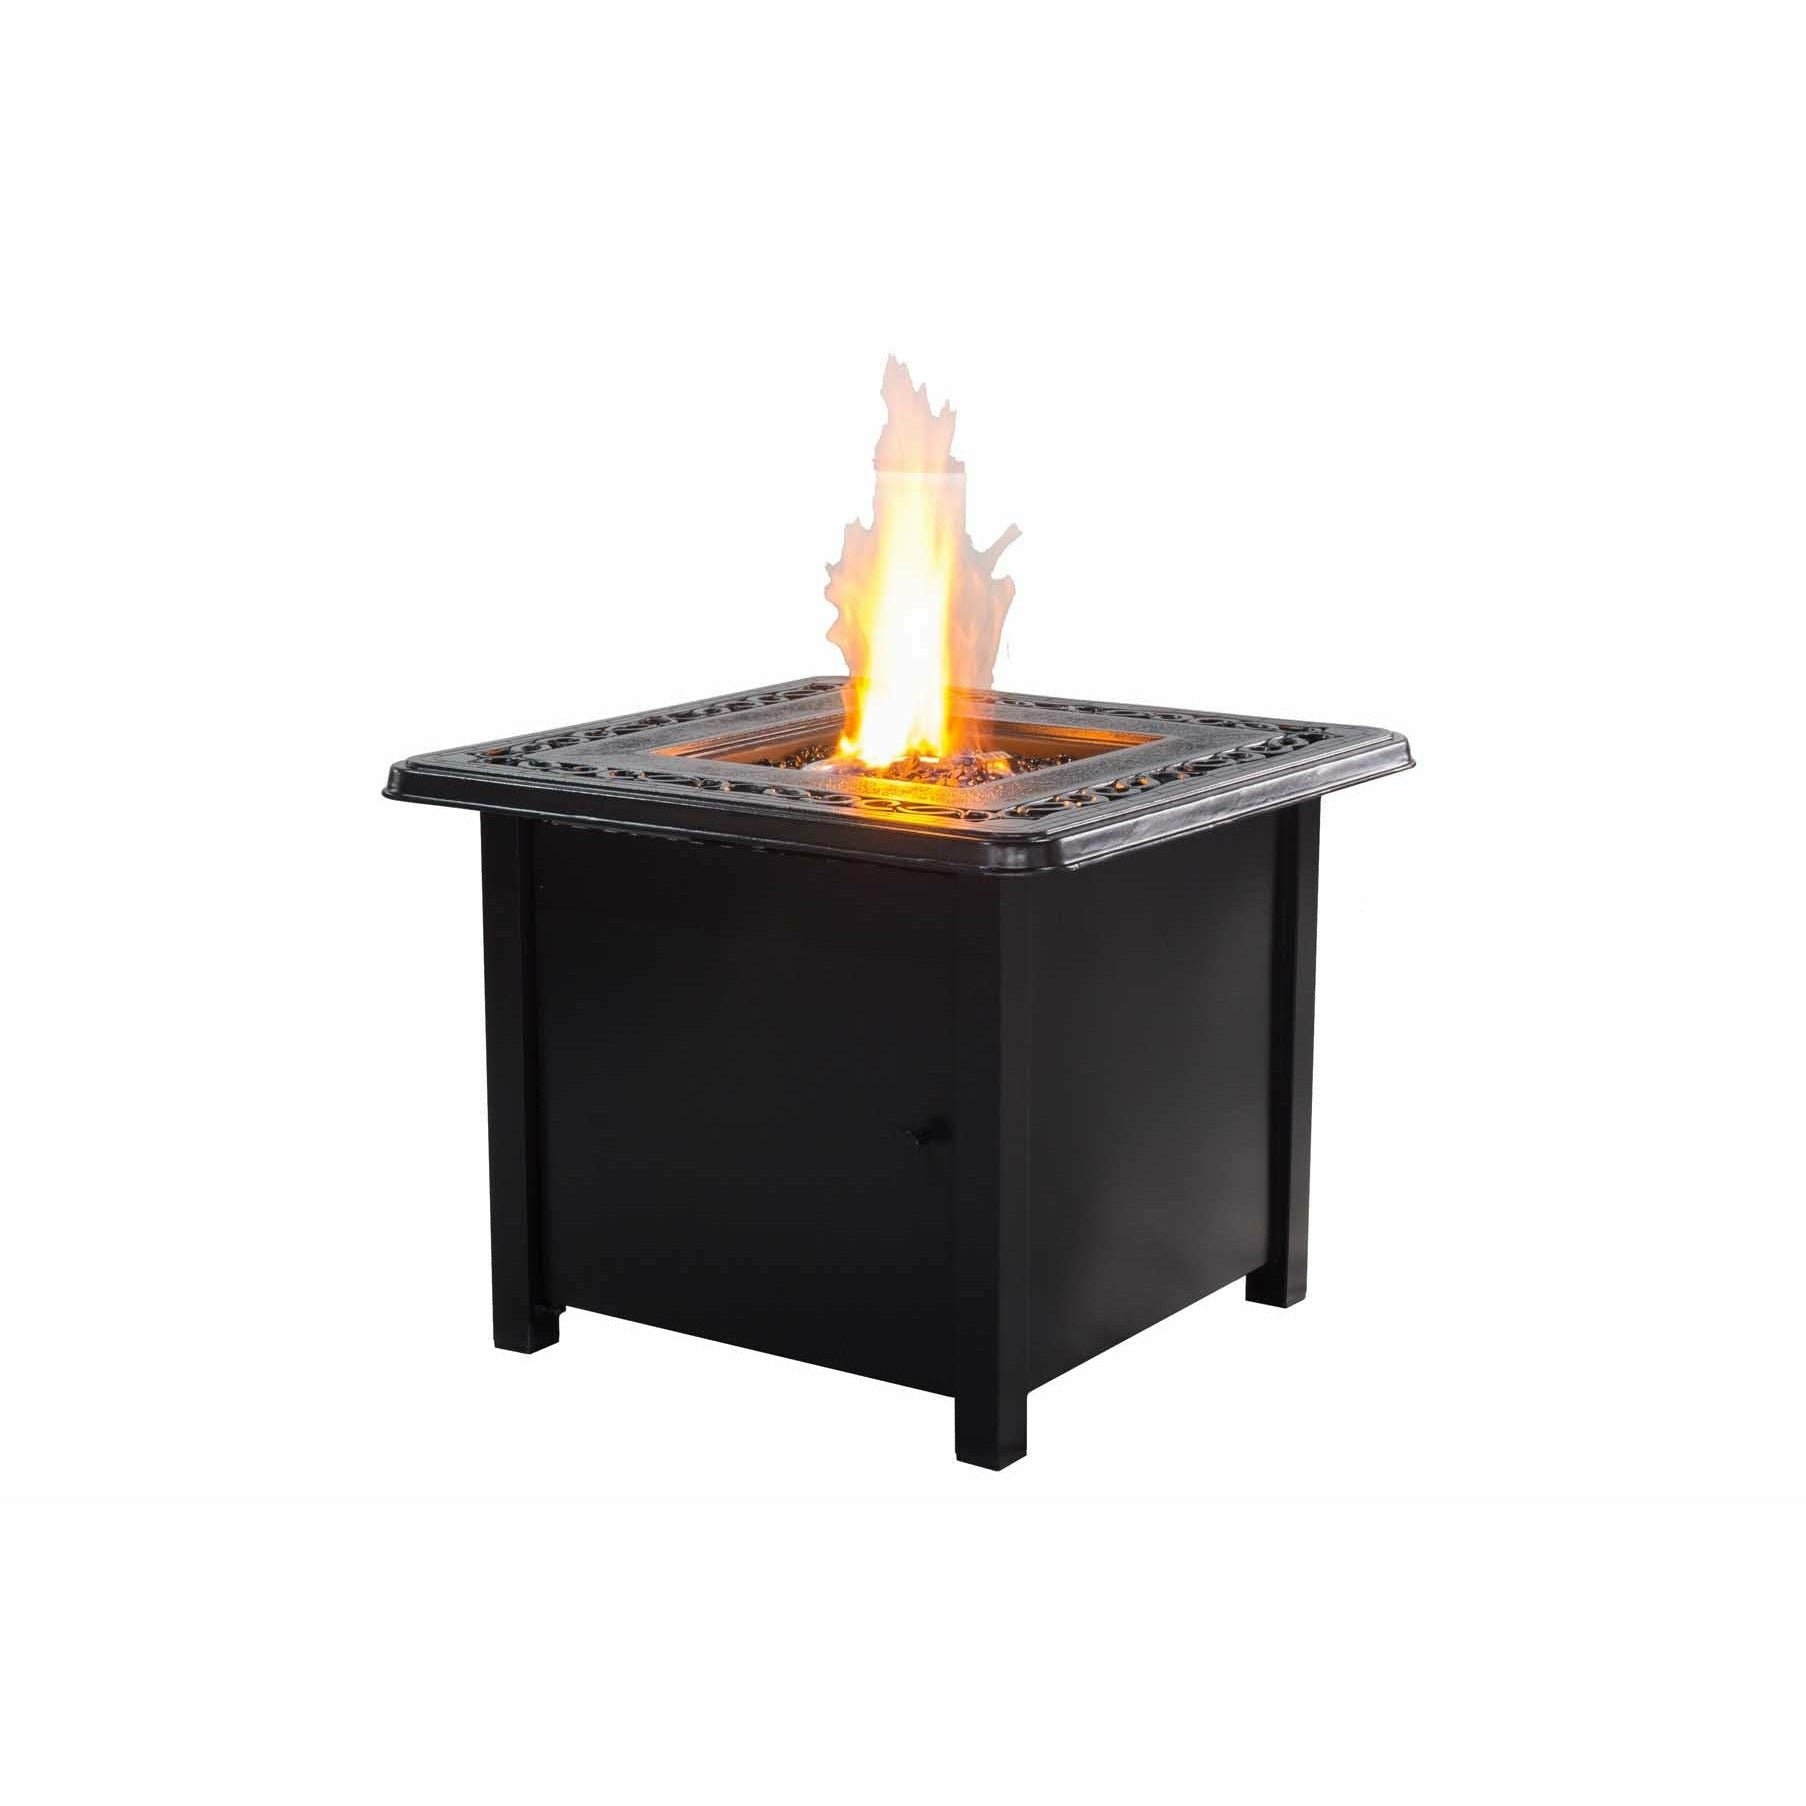 Espresso brown 32 inch gas fire pit by Gathercraft - sleek design, built-in ignition, adjustable flames, perfect for outdoor gatherings, adds warmth and ambiance, blends with any outdoor decor.